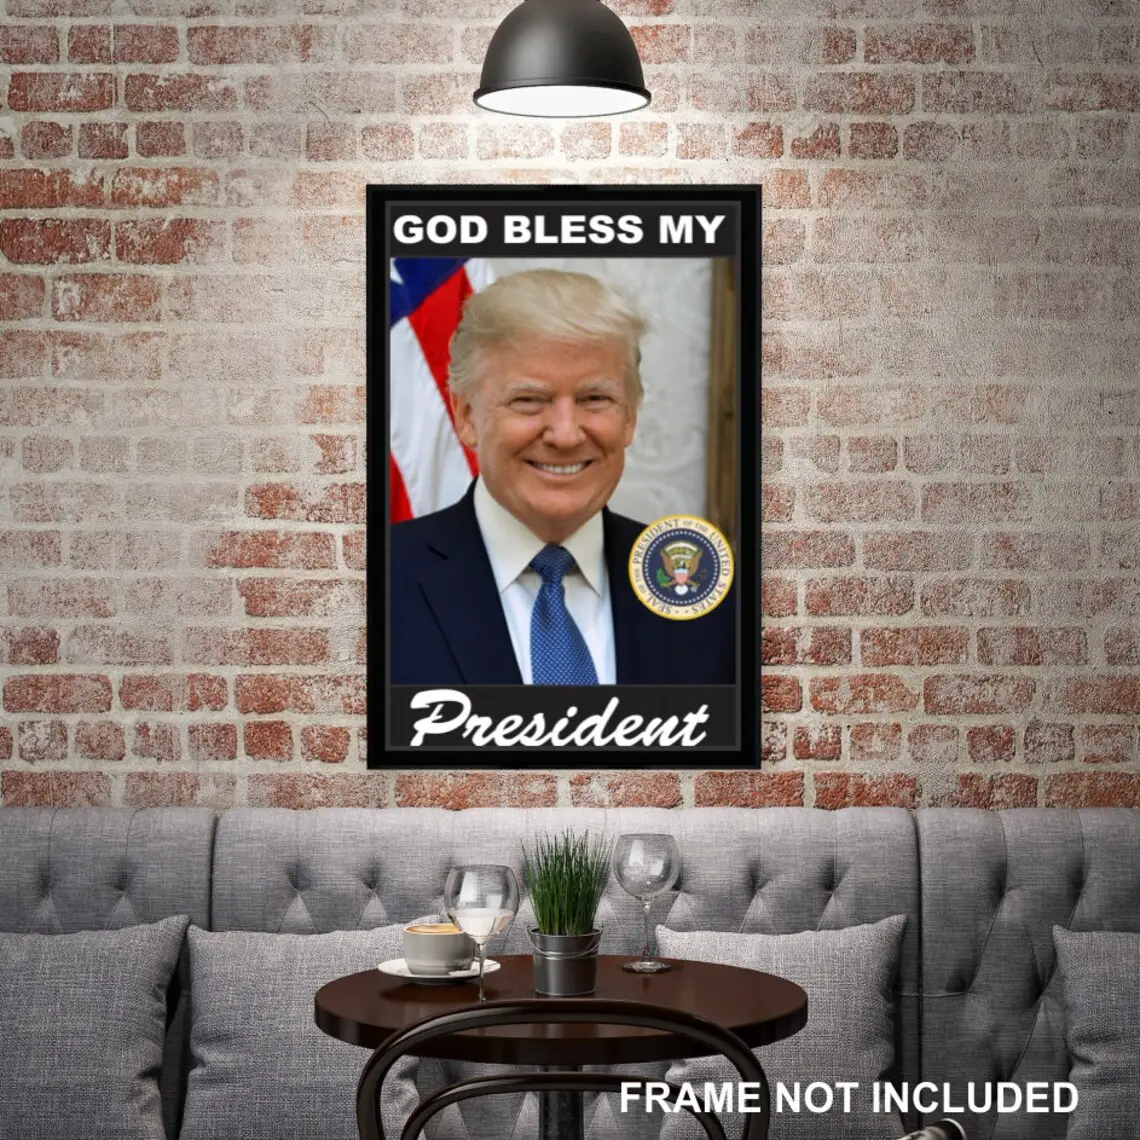 President Trump Pro Trump Poster Support our president